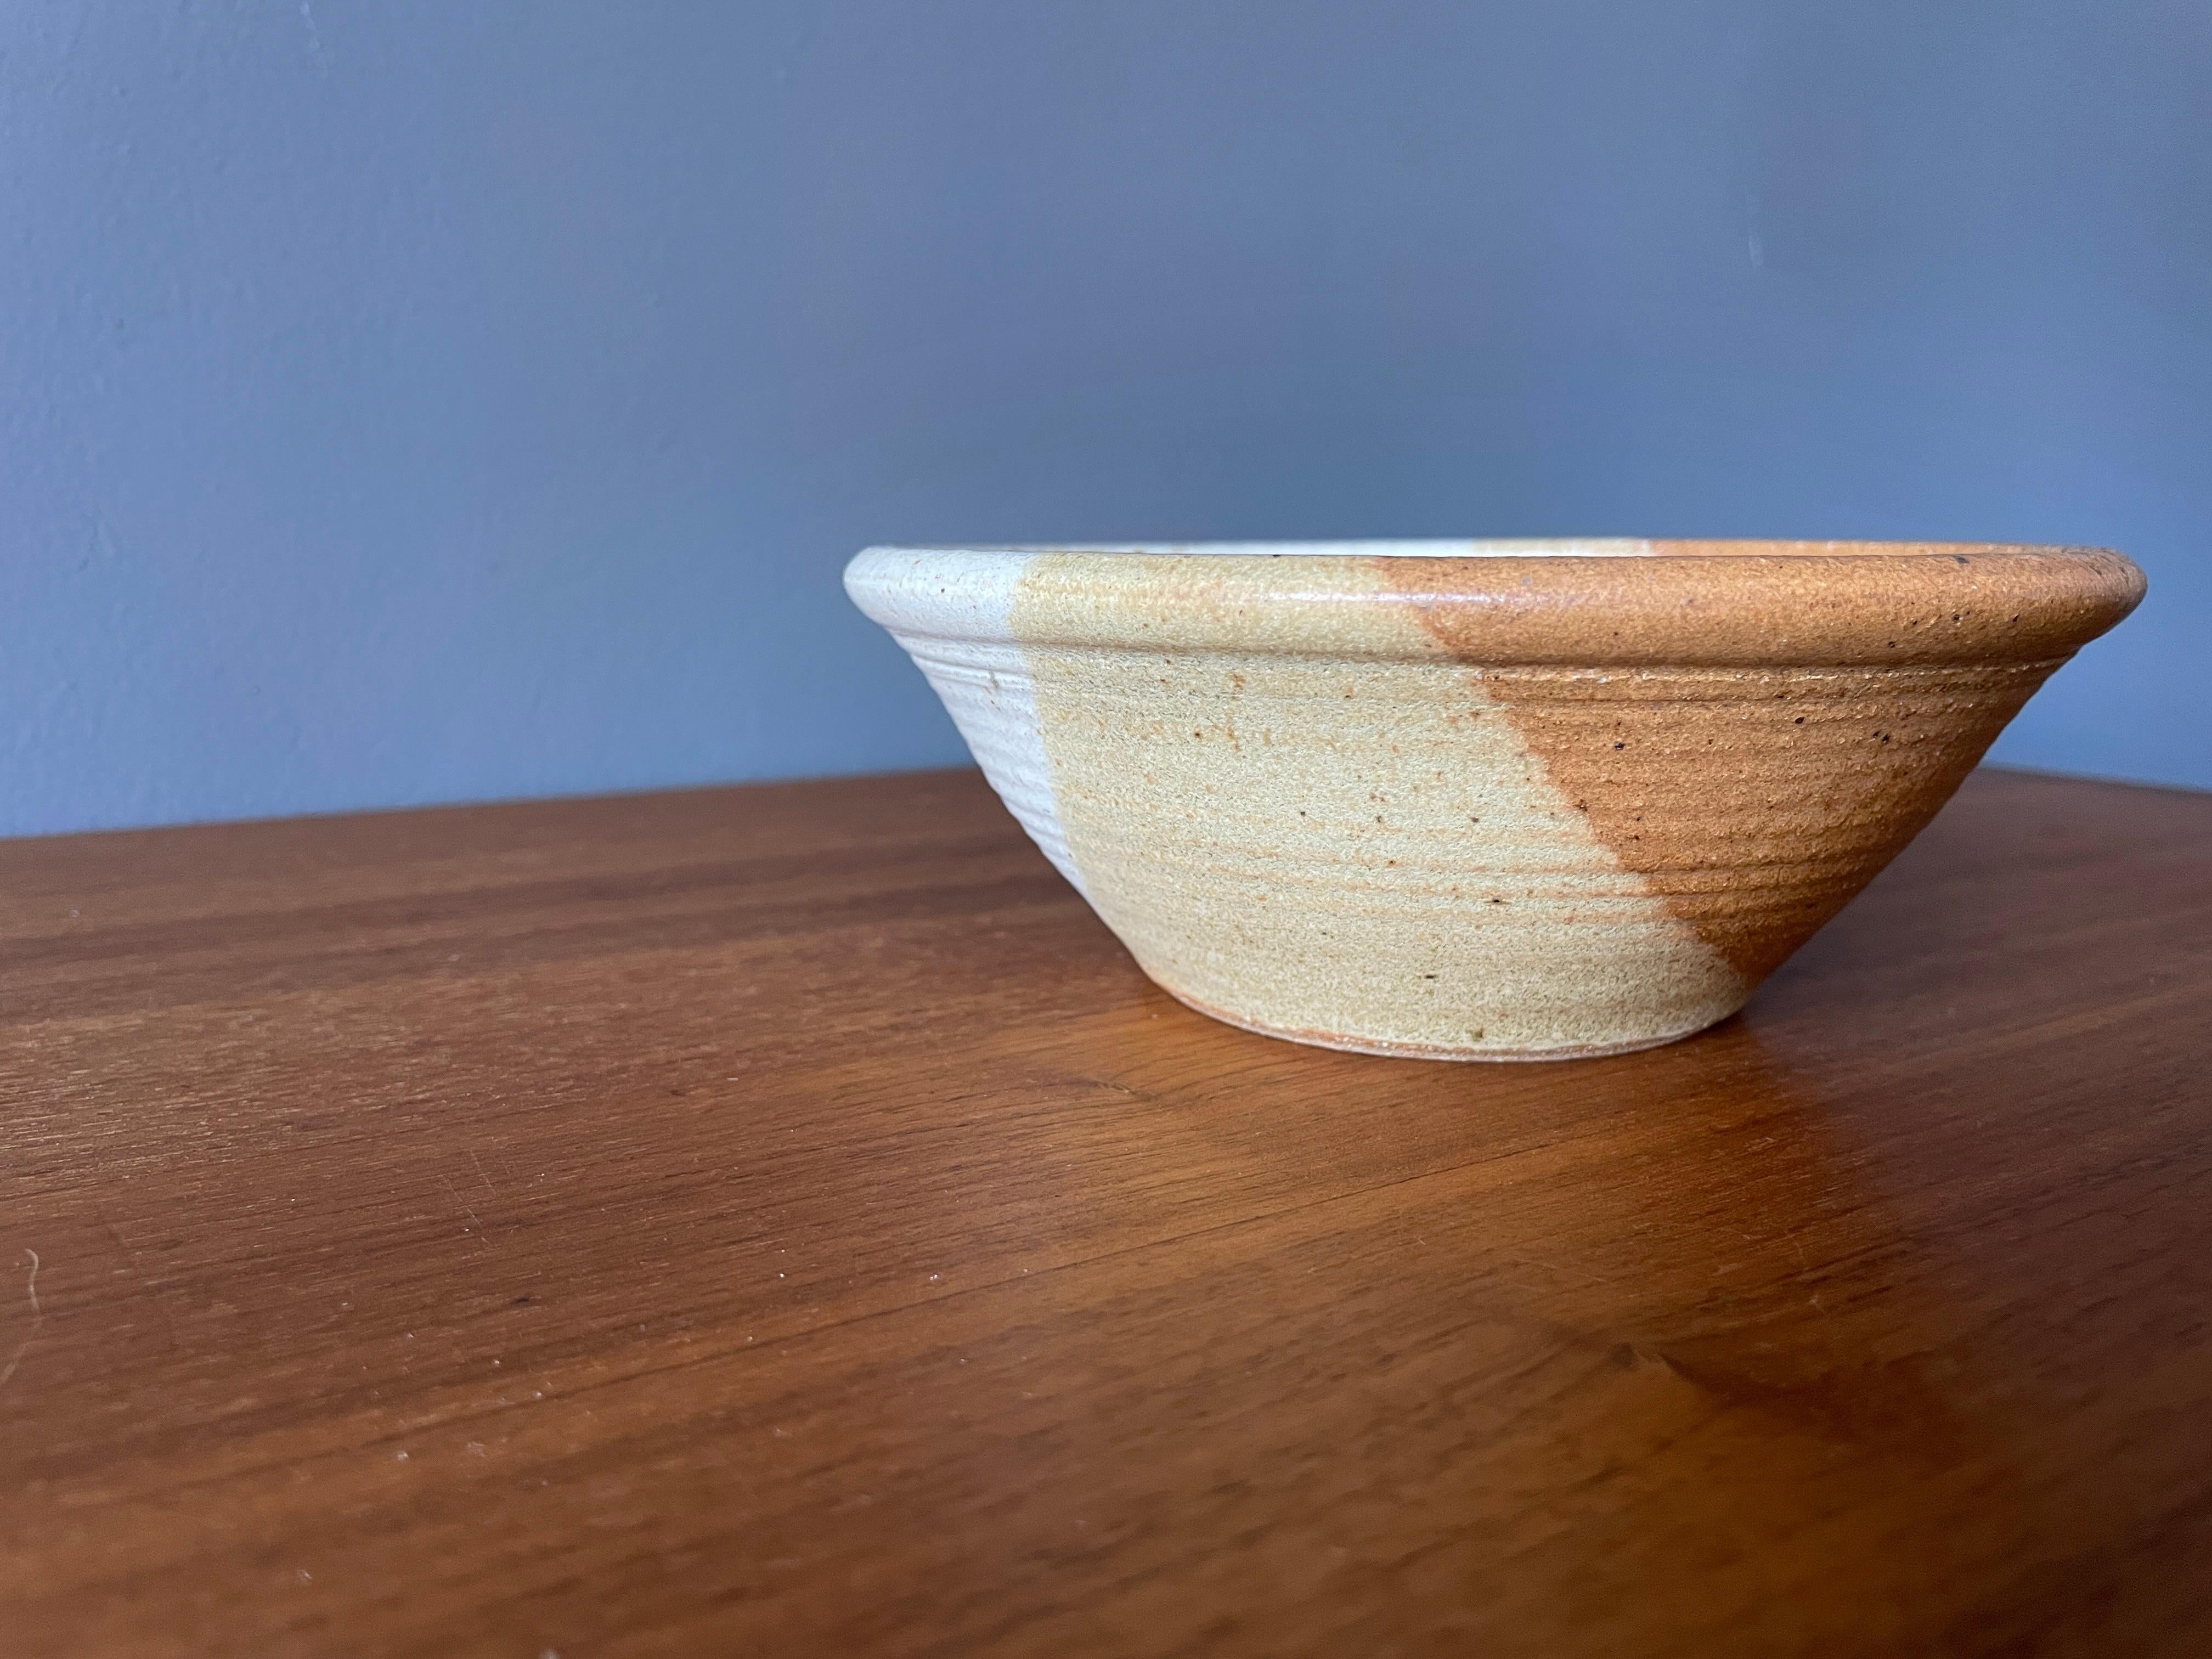 Mid-Century Modern ceramic bowl. Signed by the artist and dated 1975. Beautiful colors, composition and glazing.